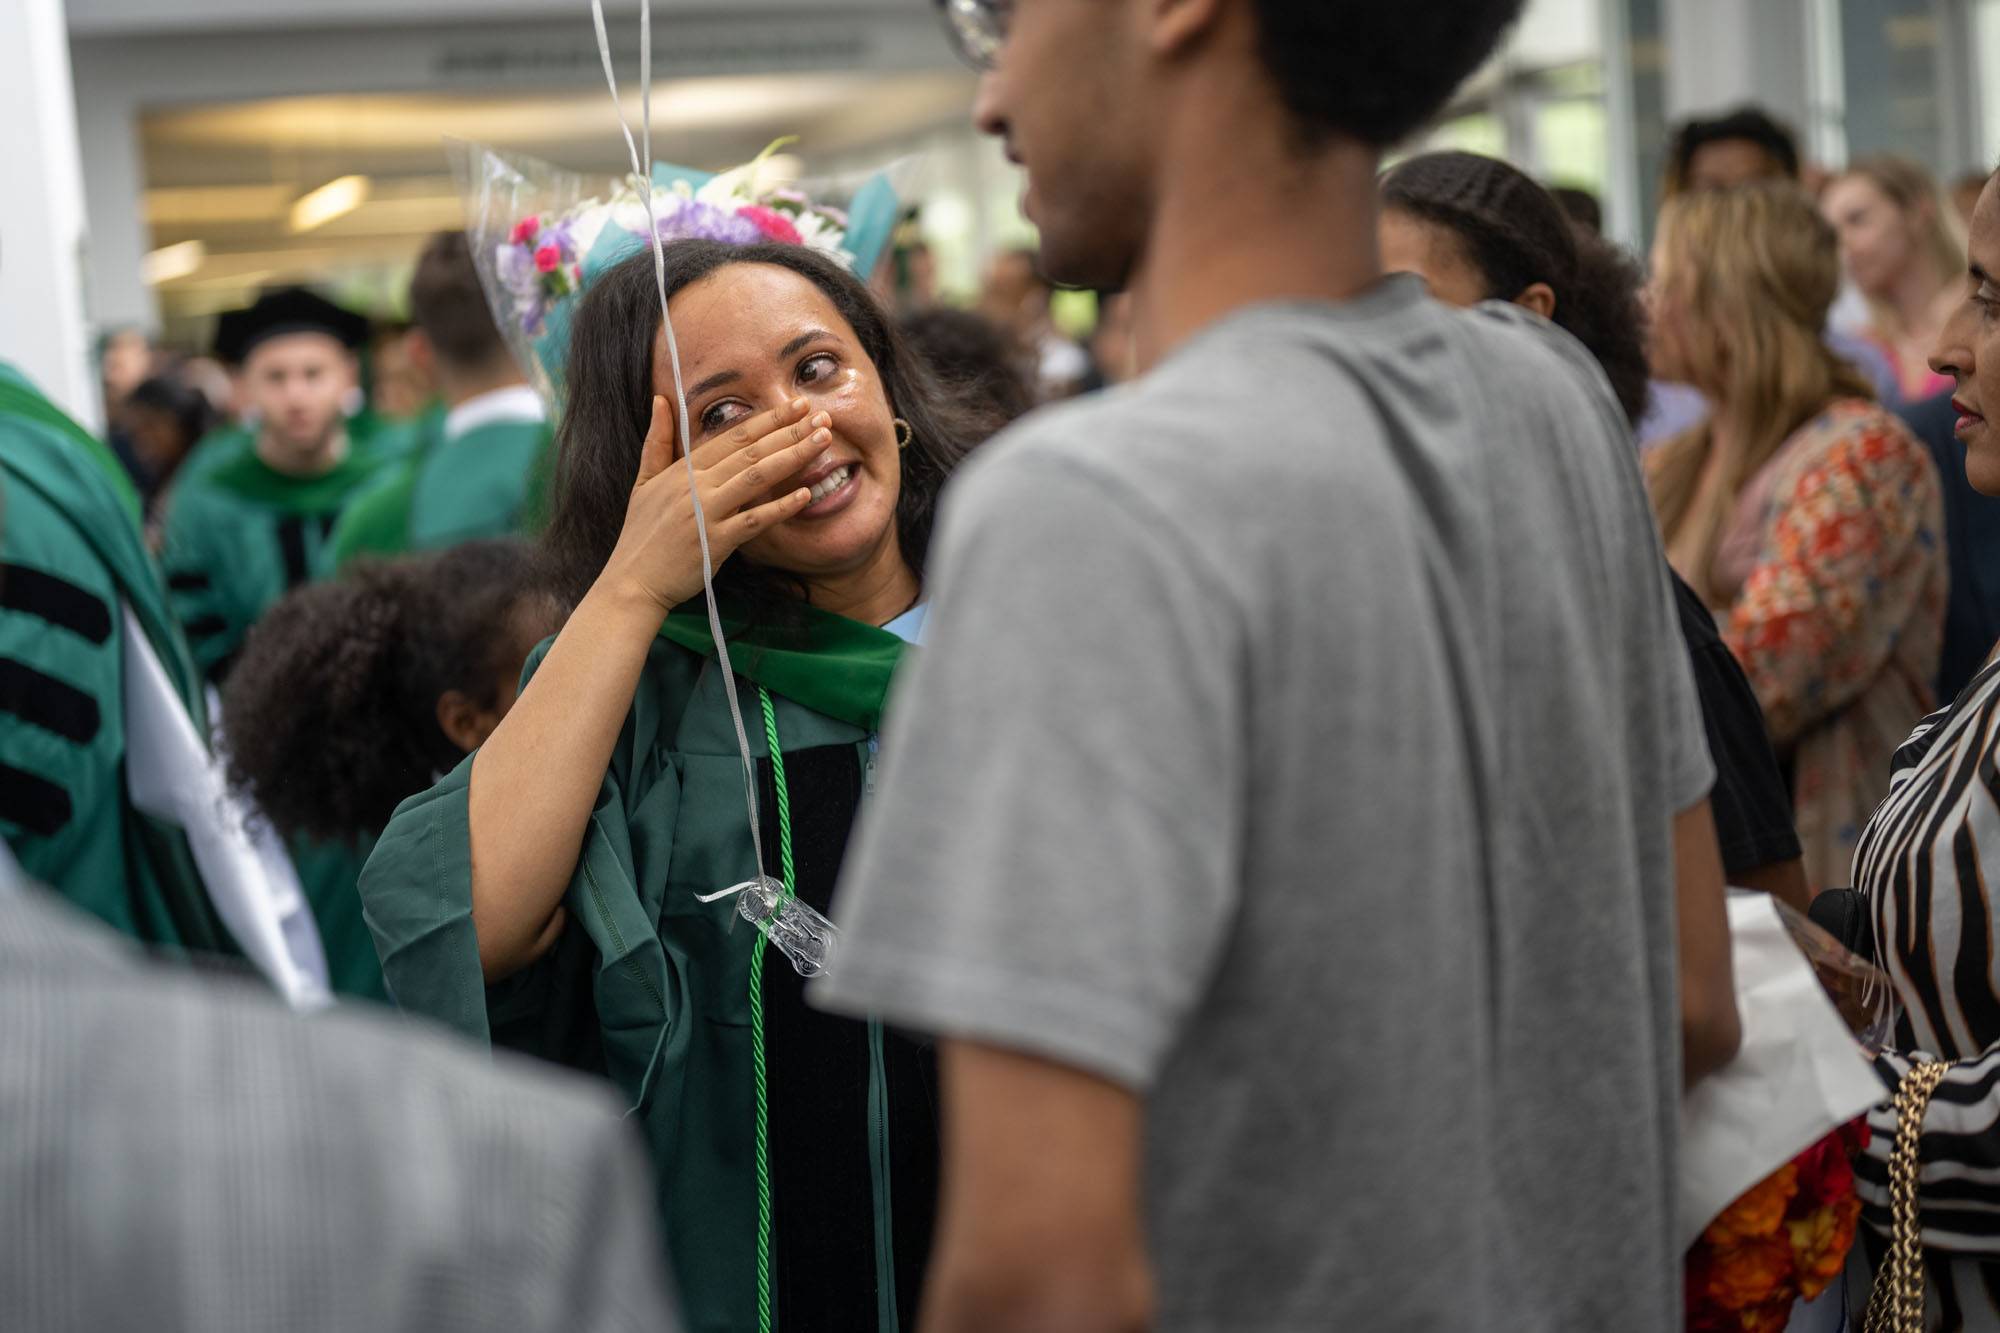 In all, 238 newly-minted Heritage College graduates departed the Convocation Center to make their mark as physicians. In the words of Commencement Speaker Tyree Winters, D.O., "Continue to change the world and do not let the cares of this world change you." 